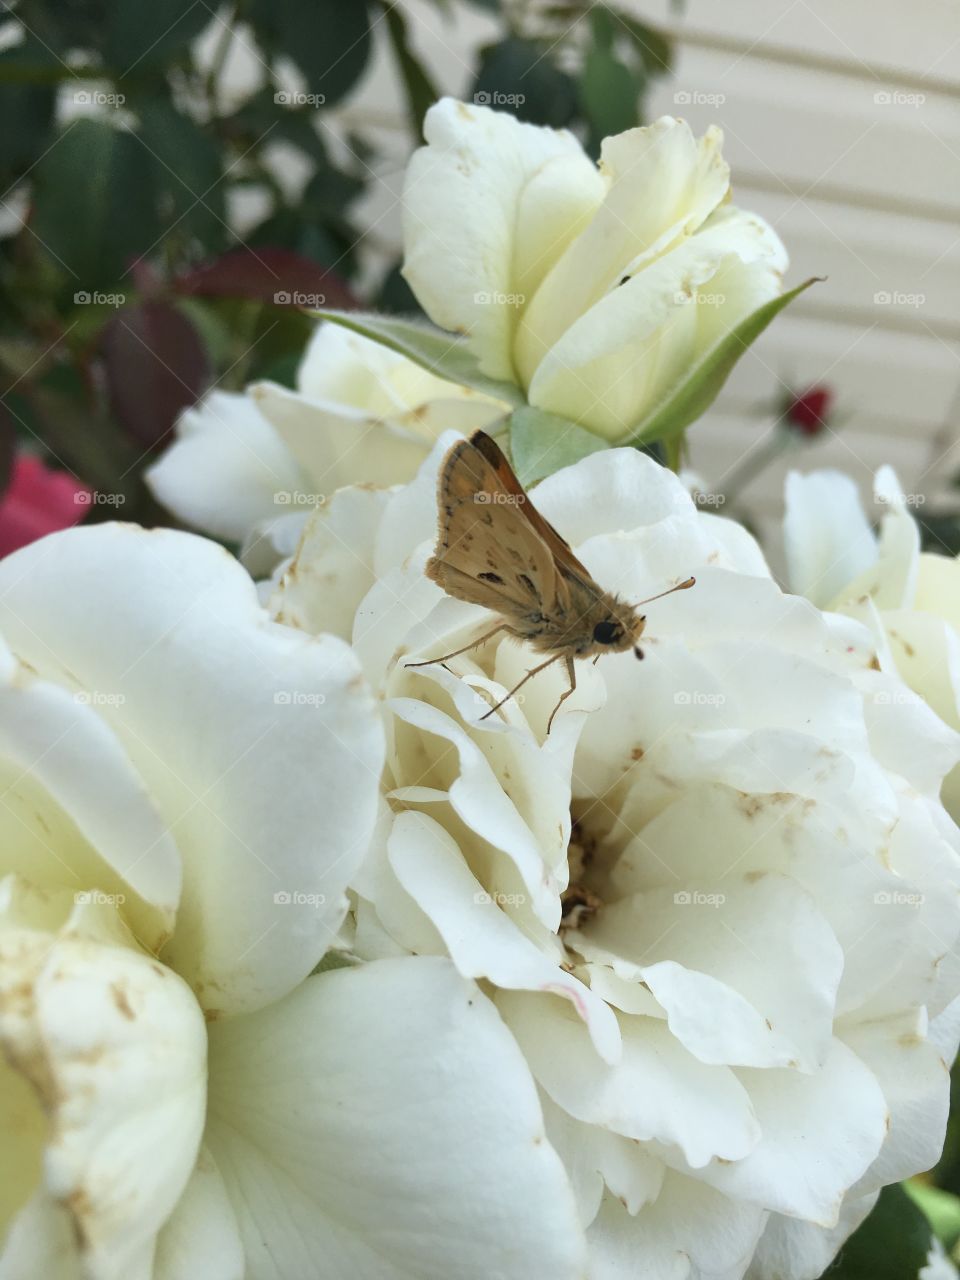 Butterfly on a white flower